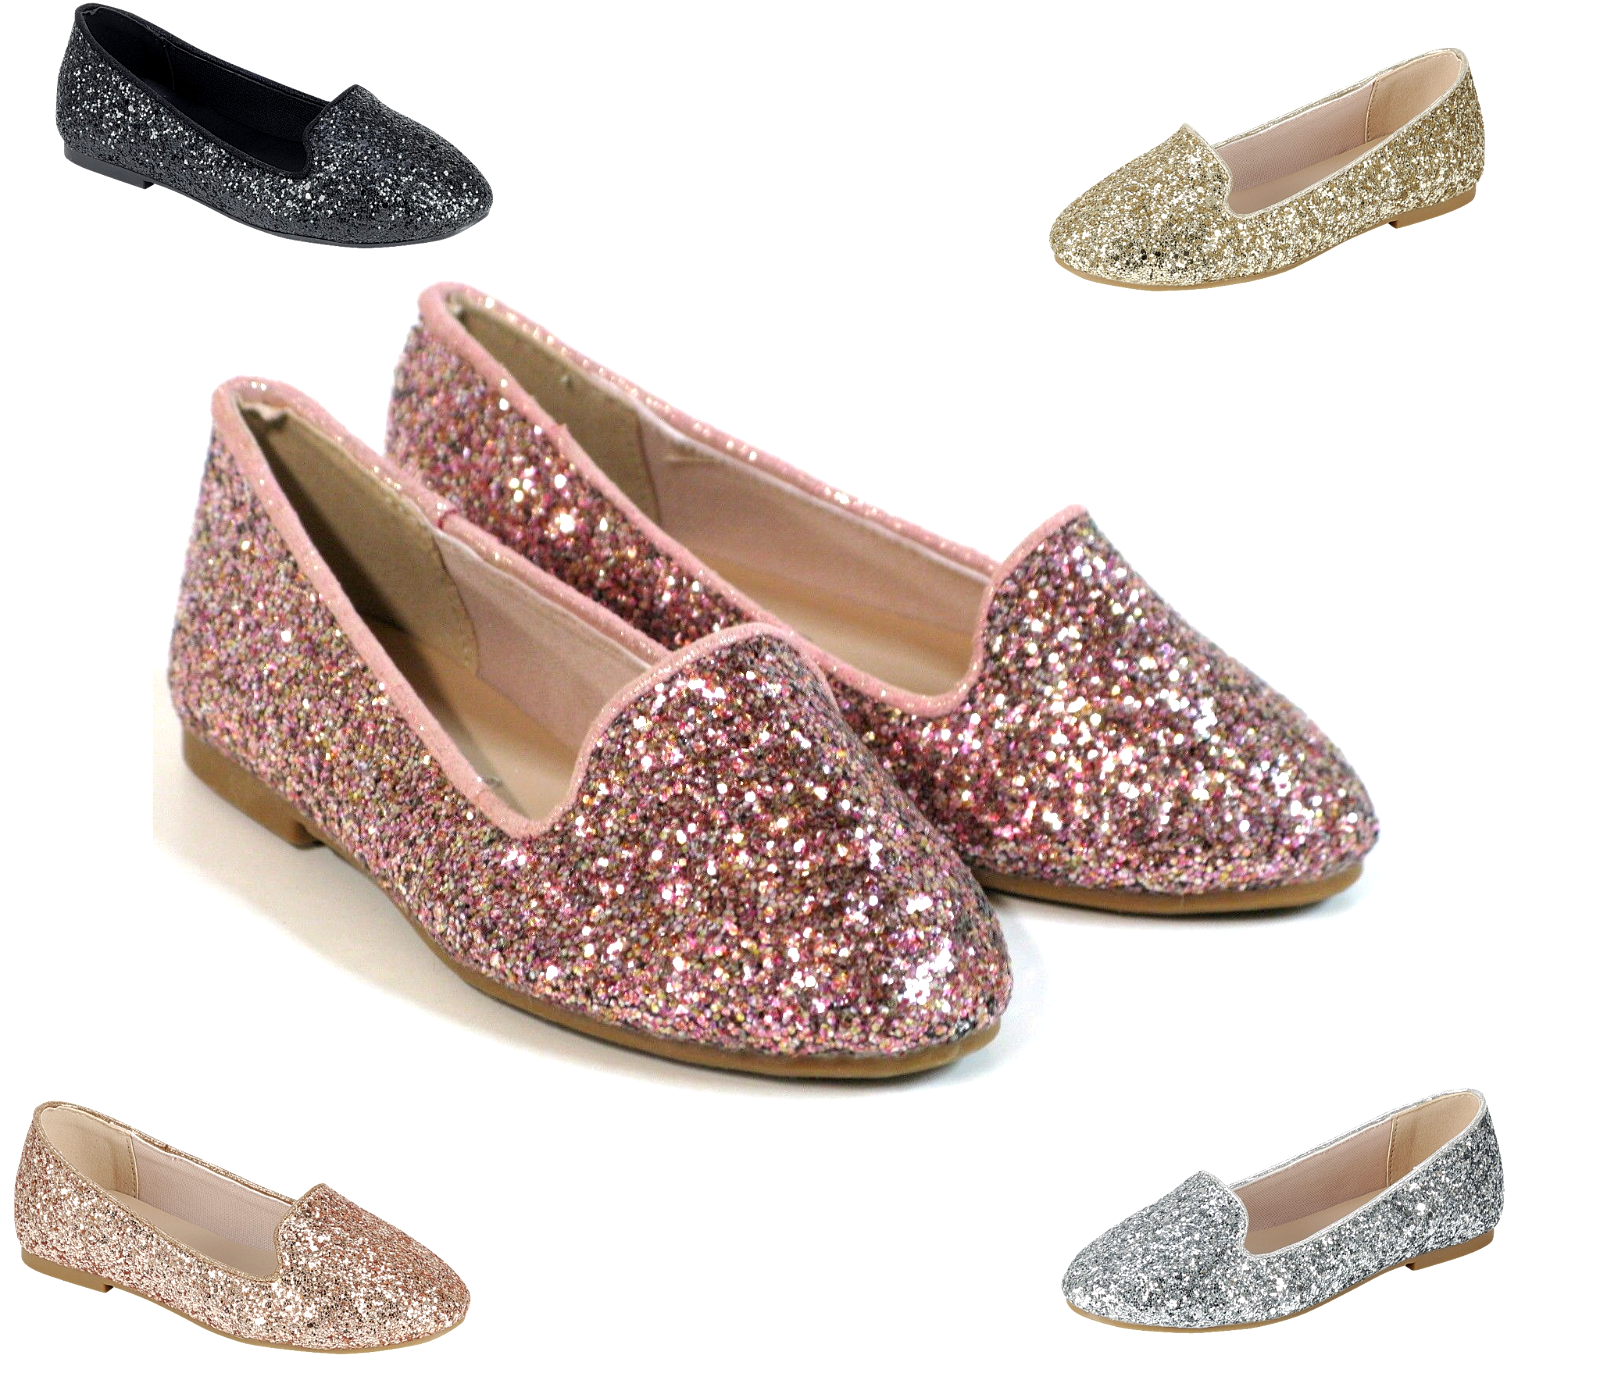 New Youth Kid Girls Glitter Sequin Slip On Shoes Ballerina Party Flats 5 Colors